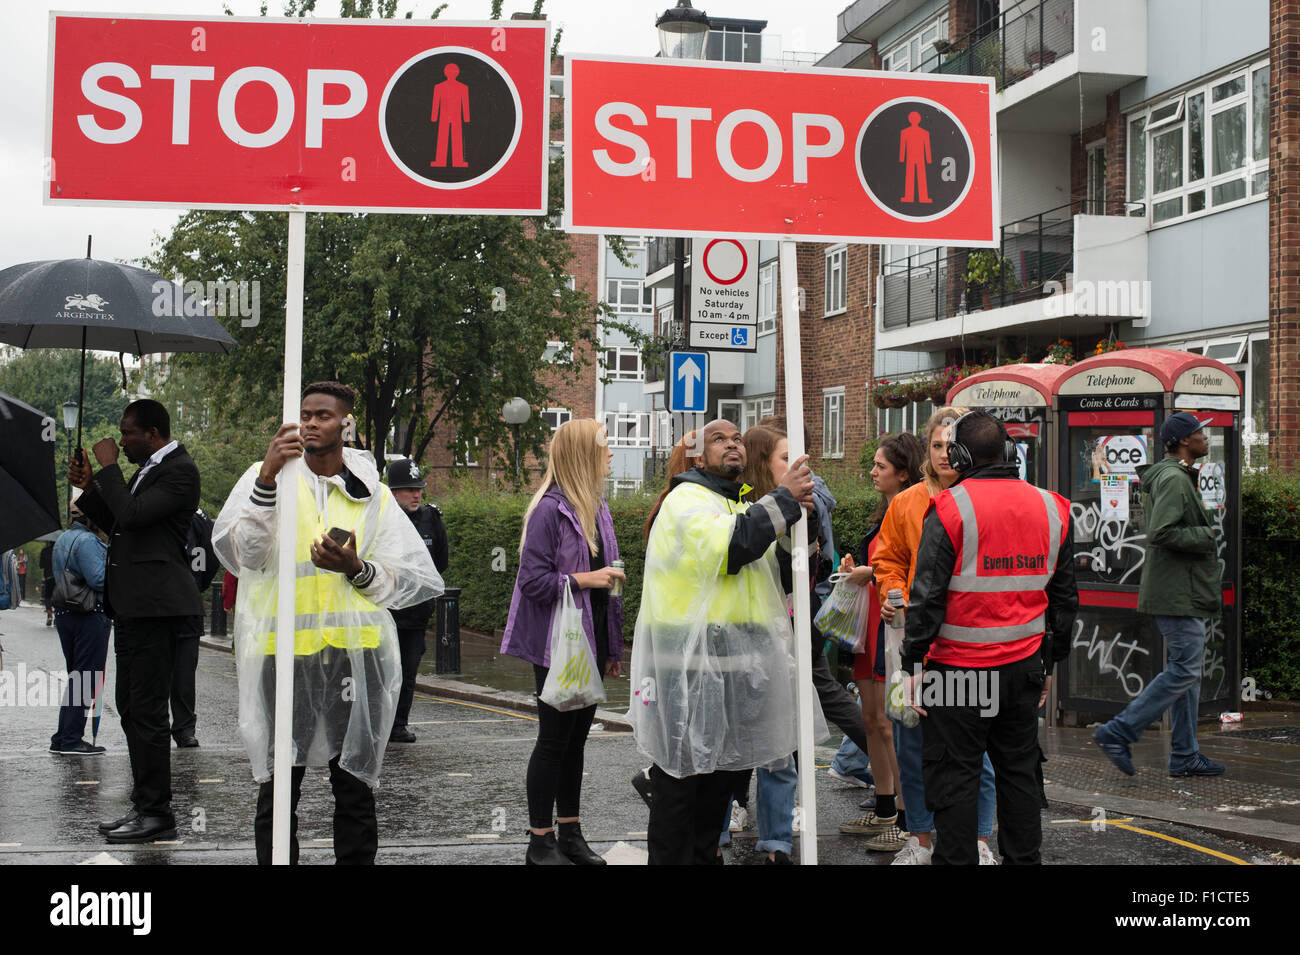 Notting Hill Carnival 2015. Security guards holding stop signs to enable carnival procession to pass Stock Photo